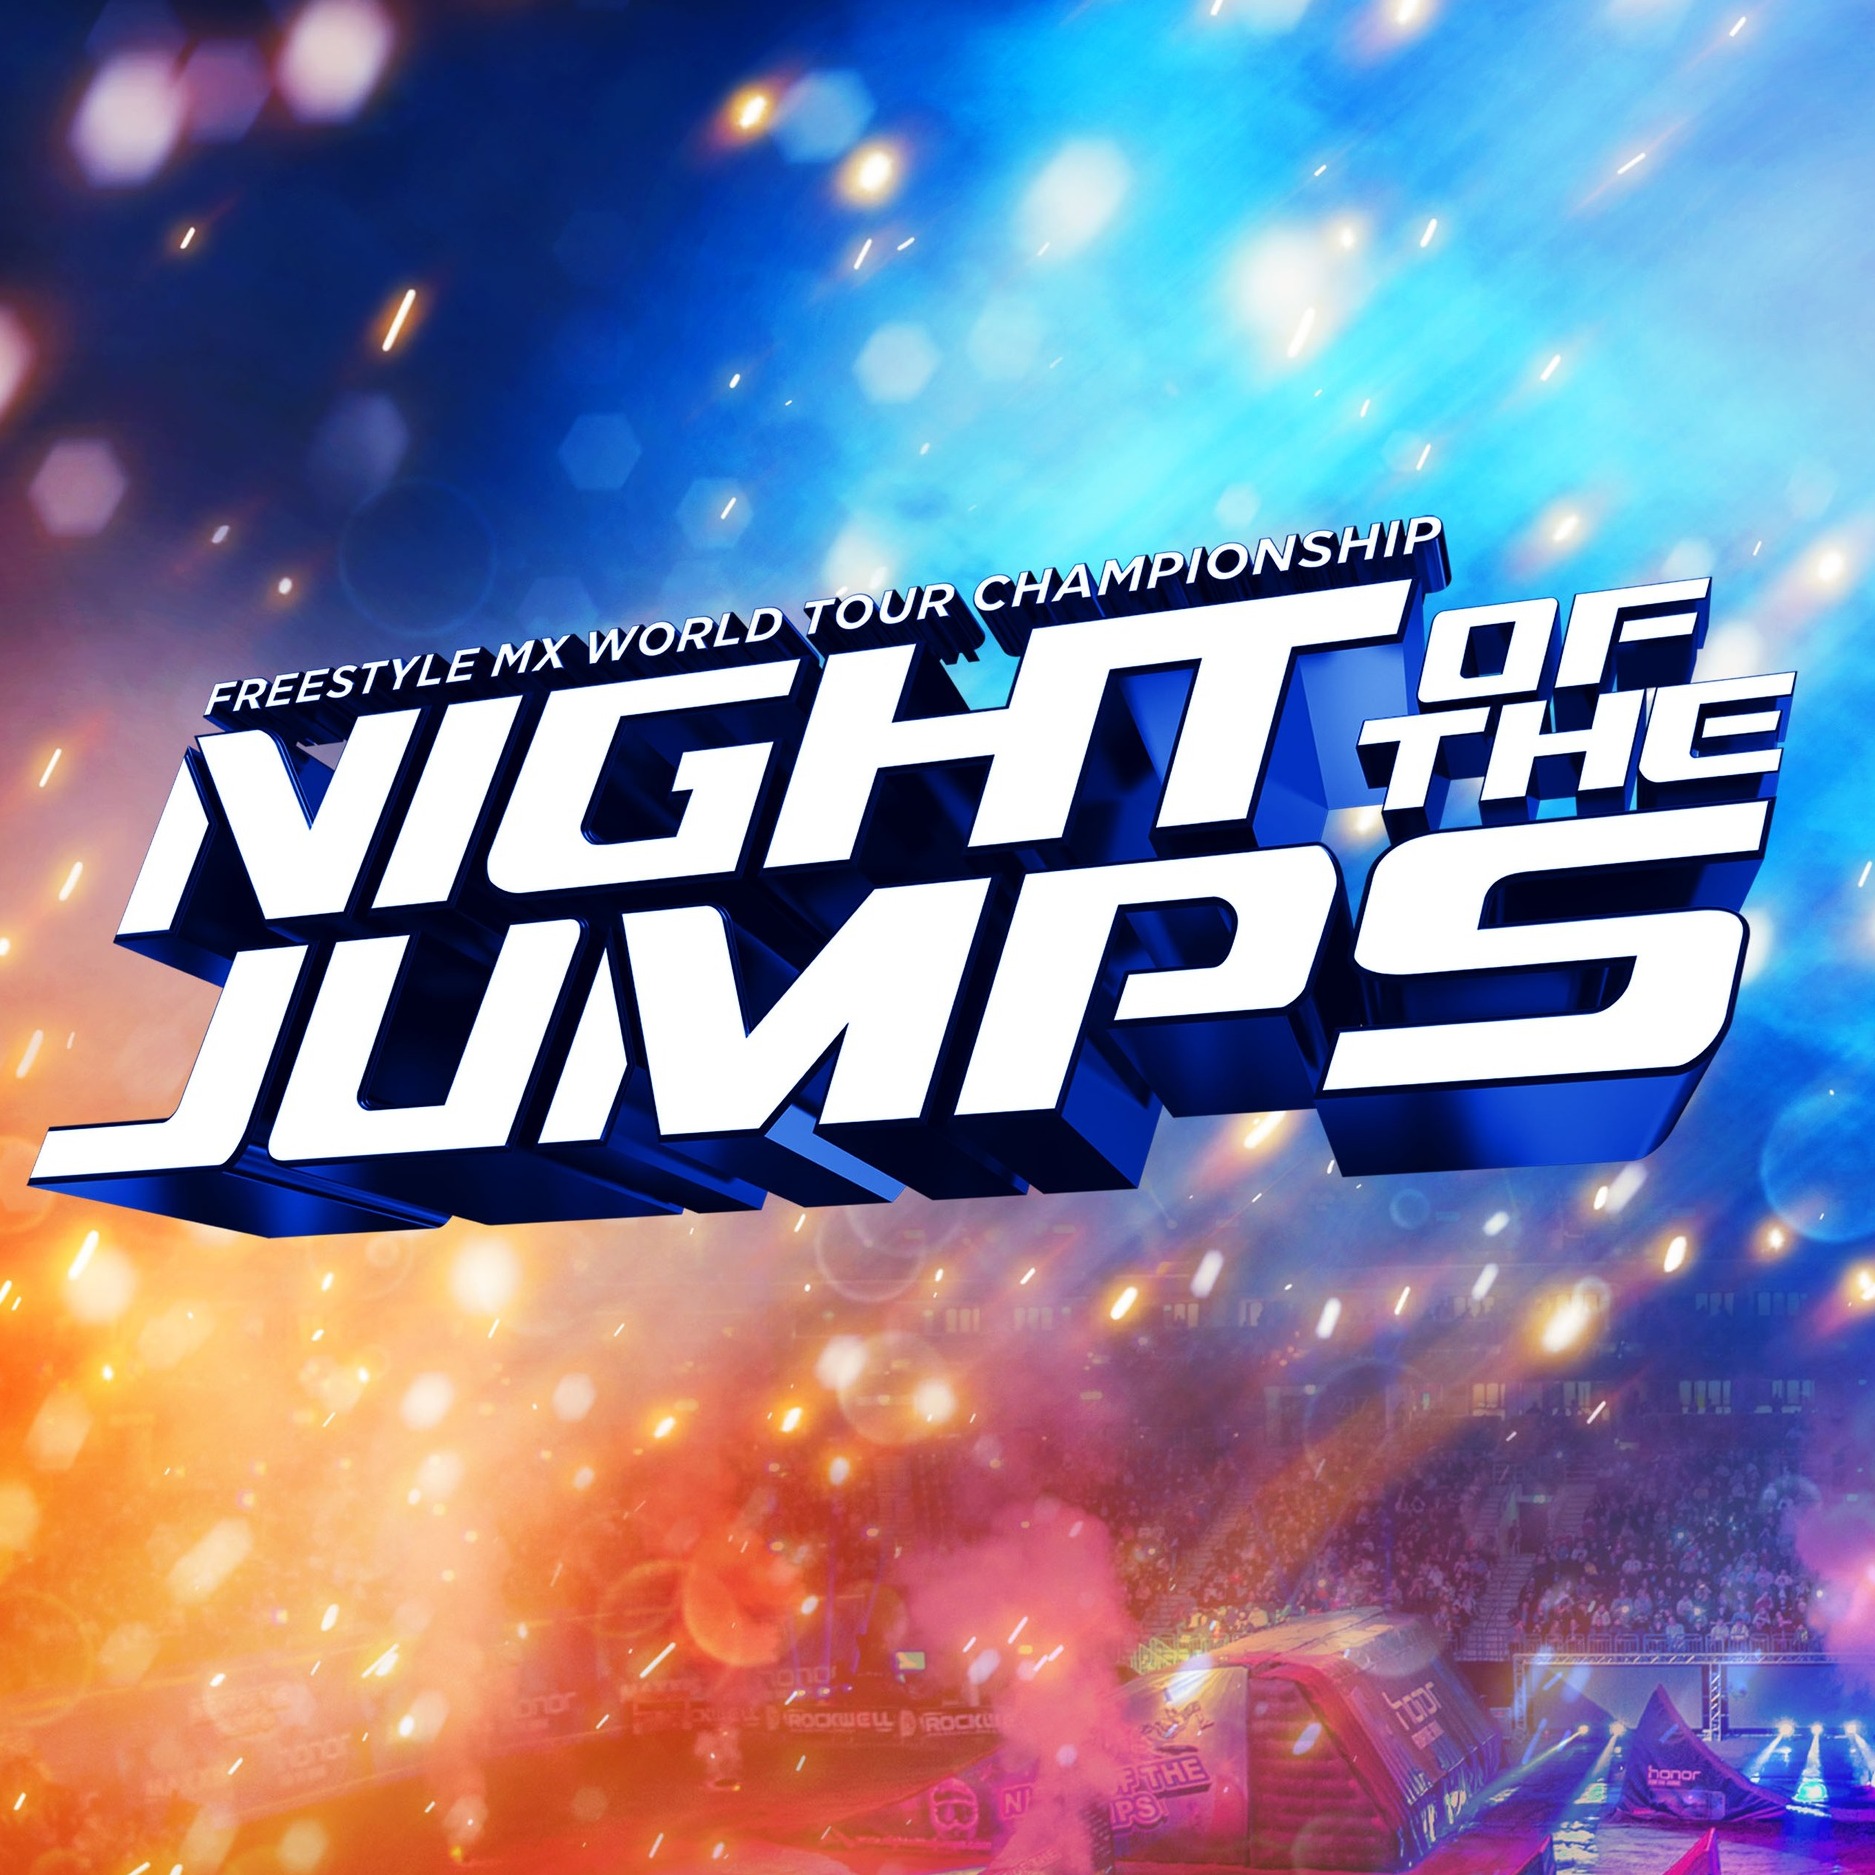 Night of the Jumps in der OVB Arena Tickets